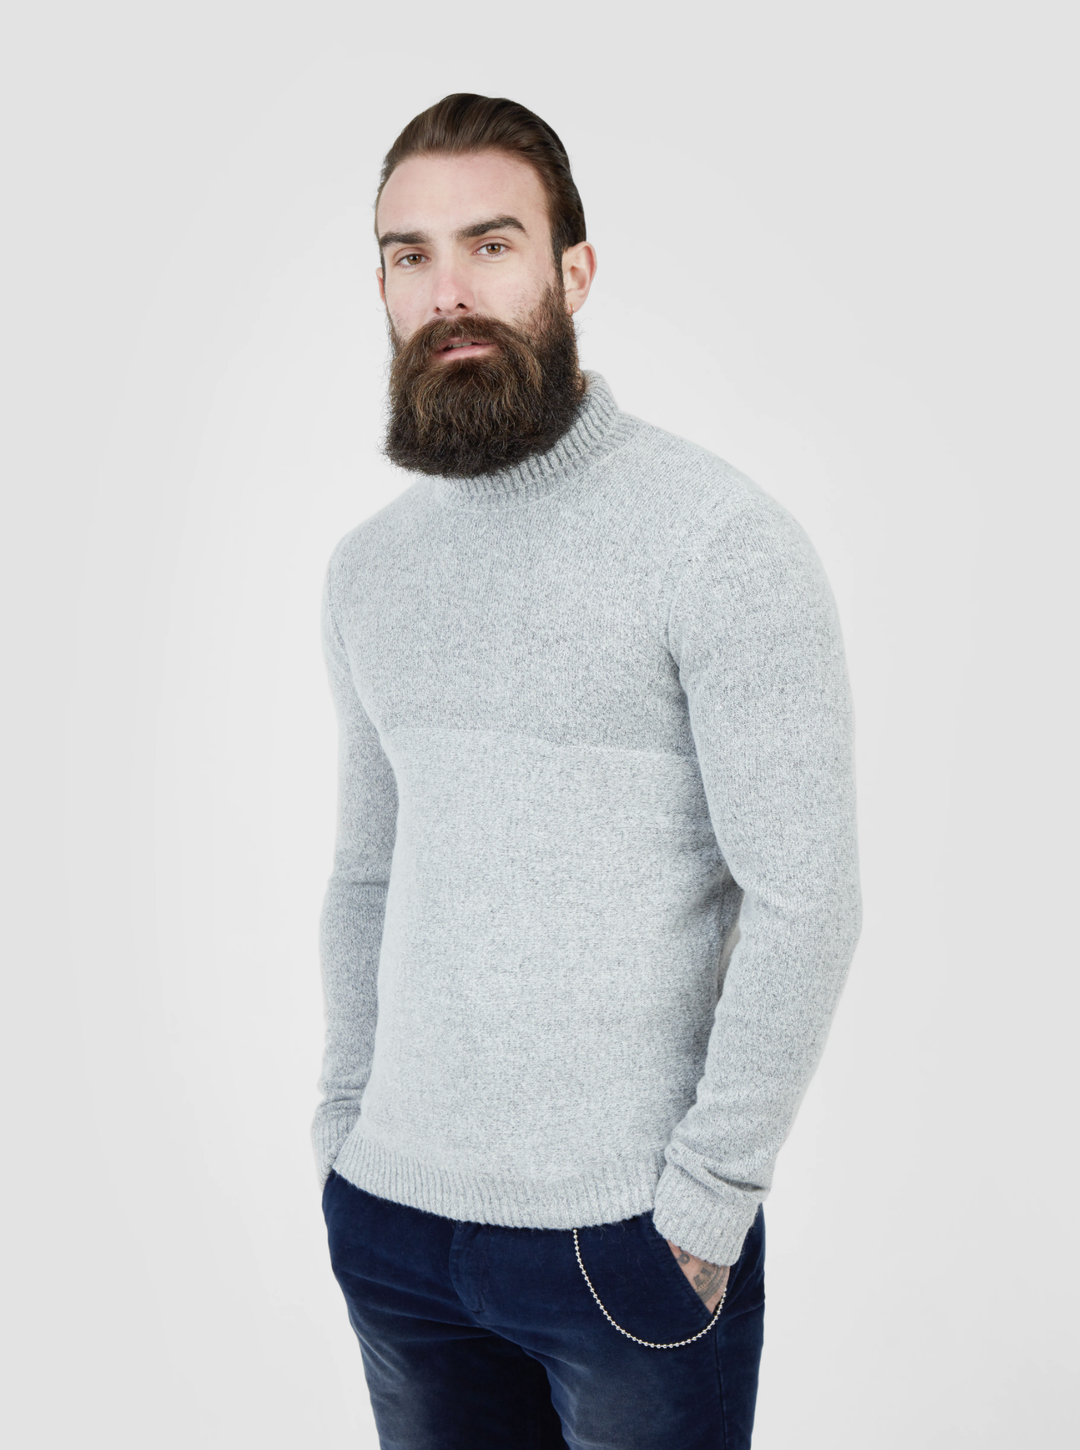 Pearly King Earthling Low Turtle Neck Knit in Light Grey